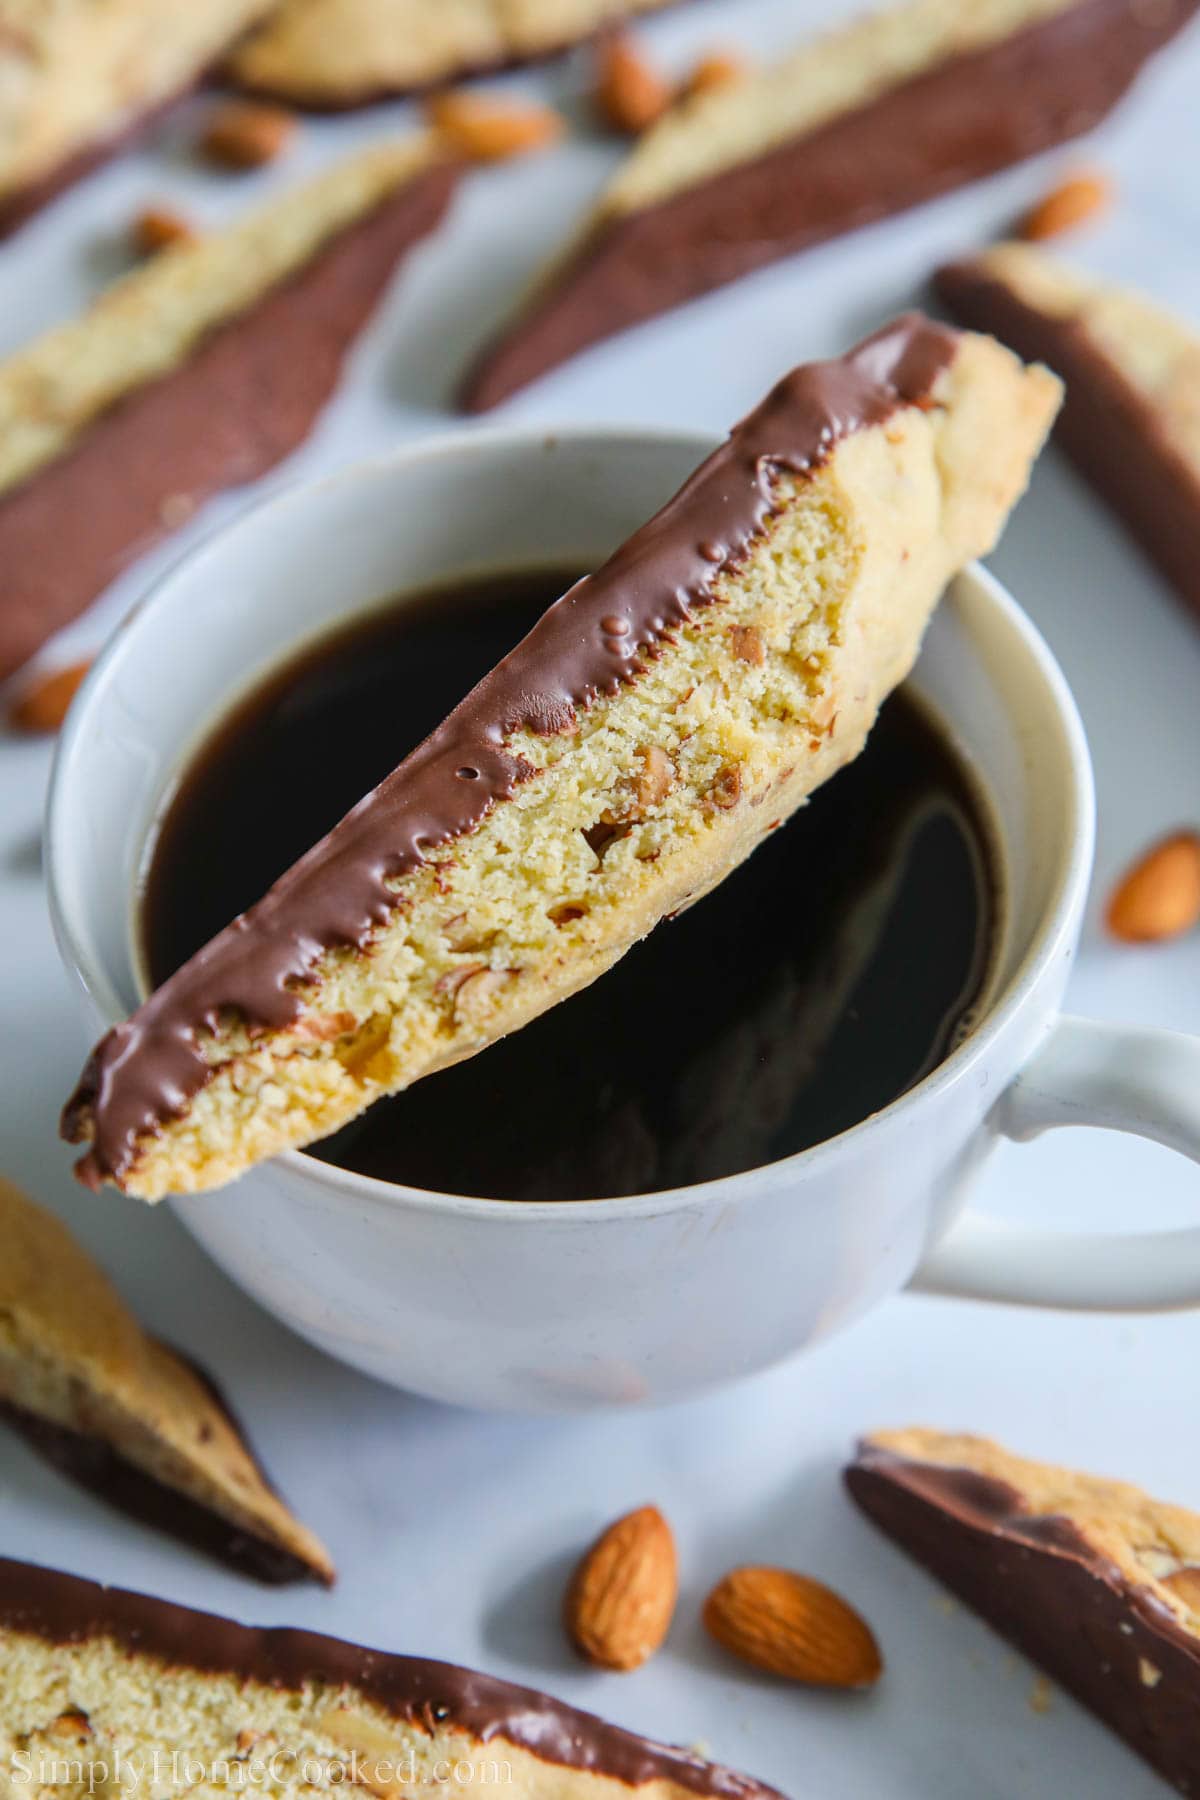 Chocolate Dipped Almond Biscotti laying on top of a cup of coffee.